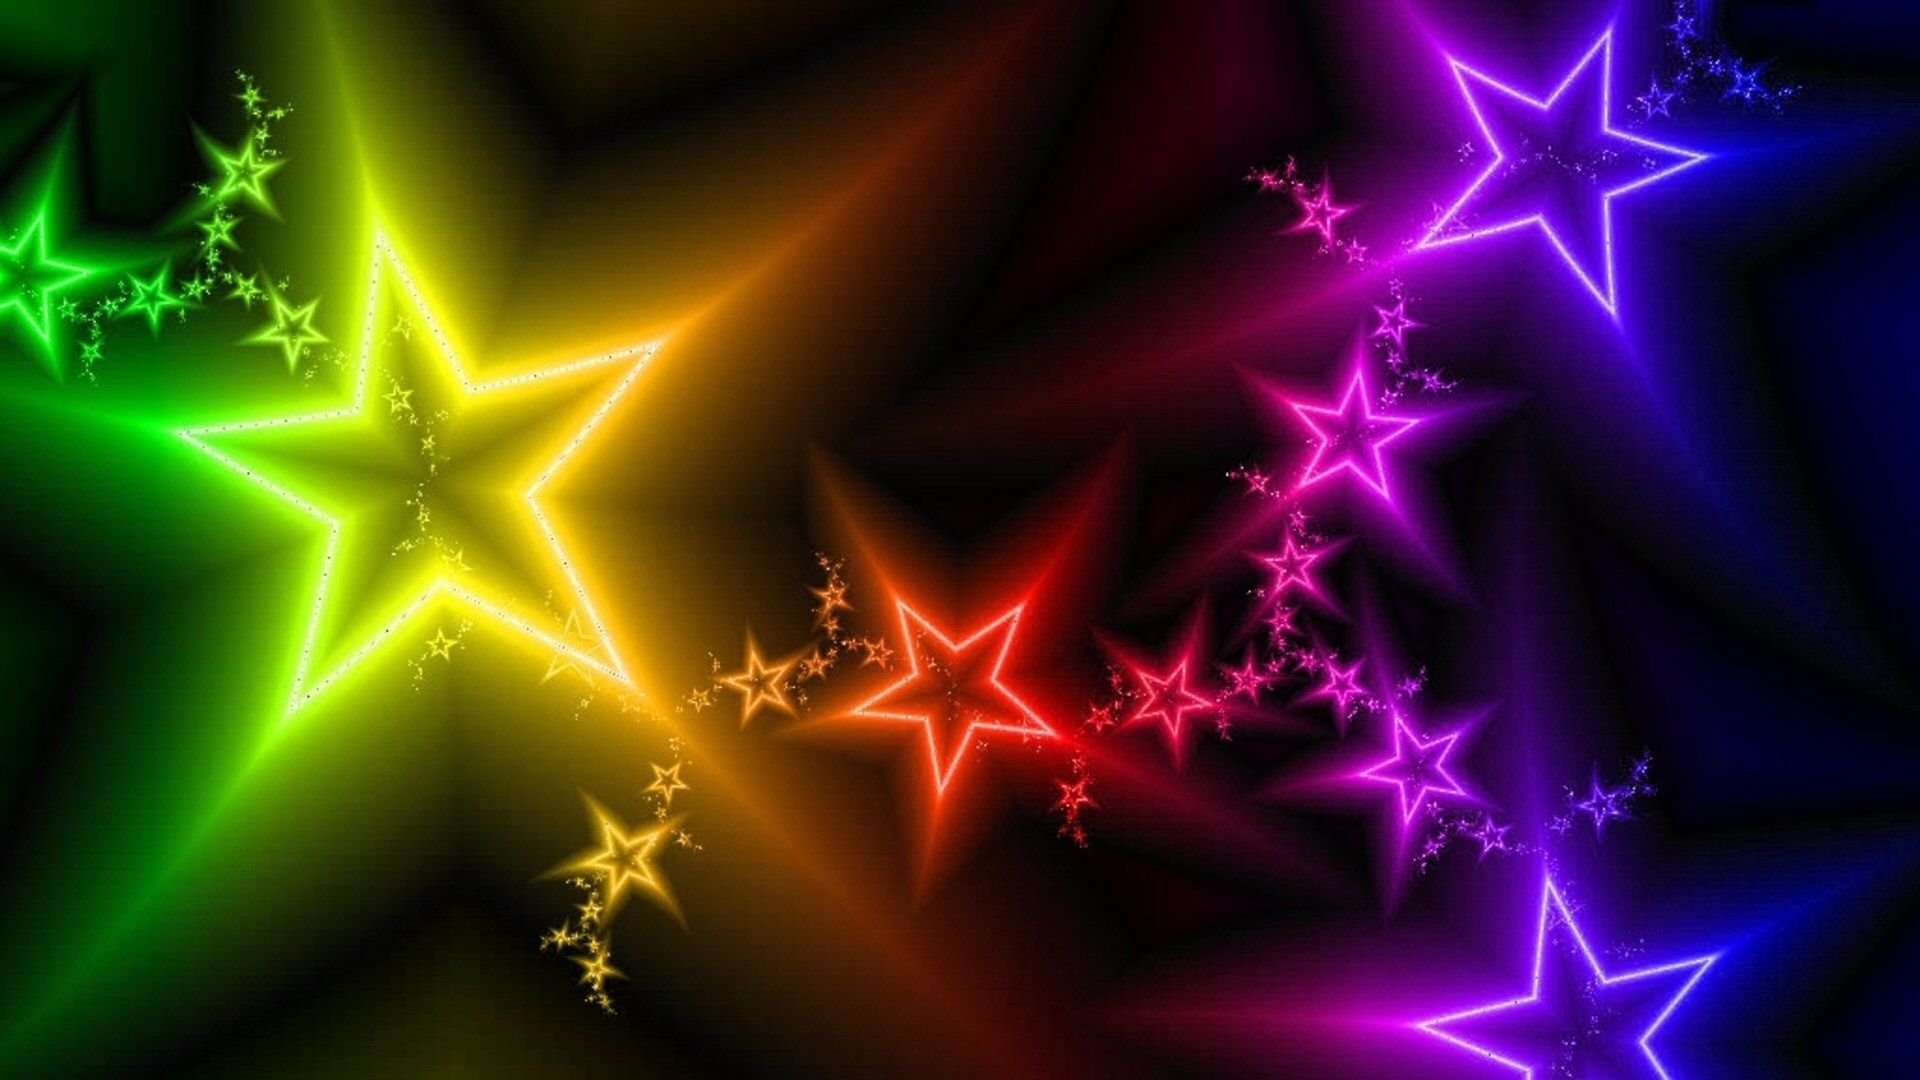 Wallpaper Original stars, light, colorful, abstract Background